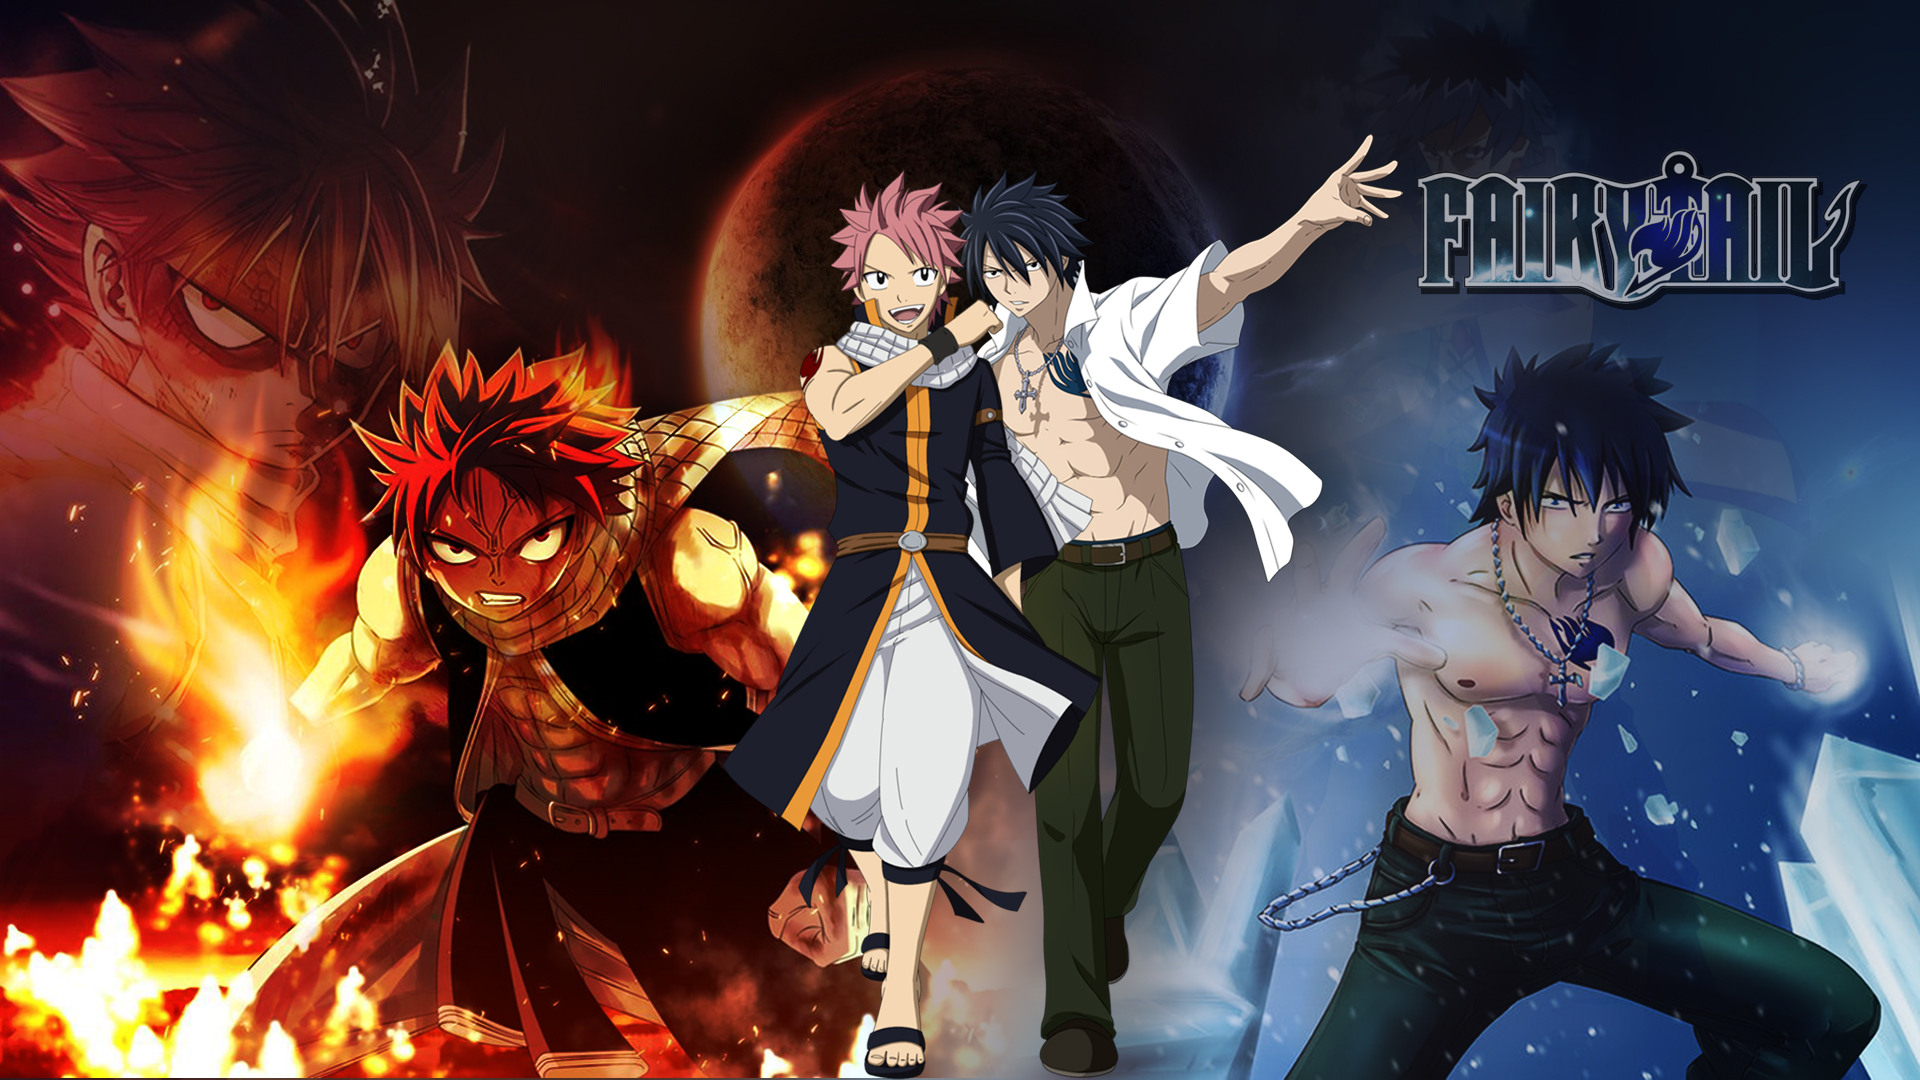 Anime Fairy Tail Wallpaper - Free Anime Downloads